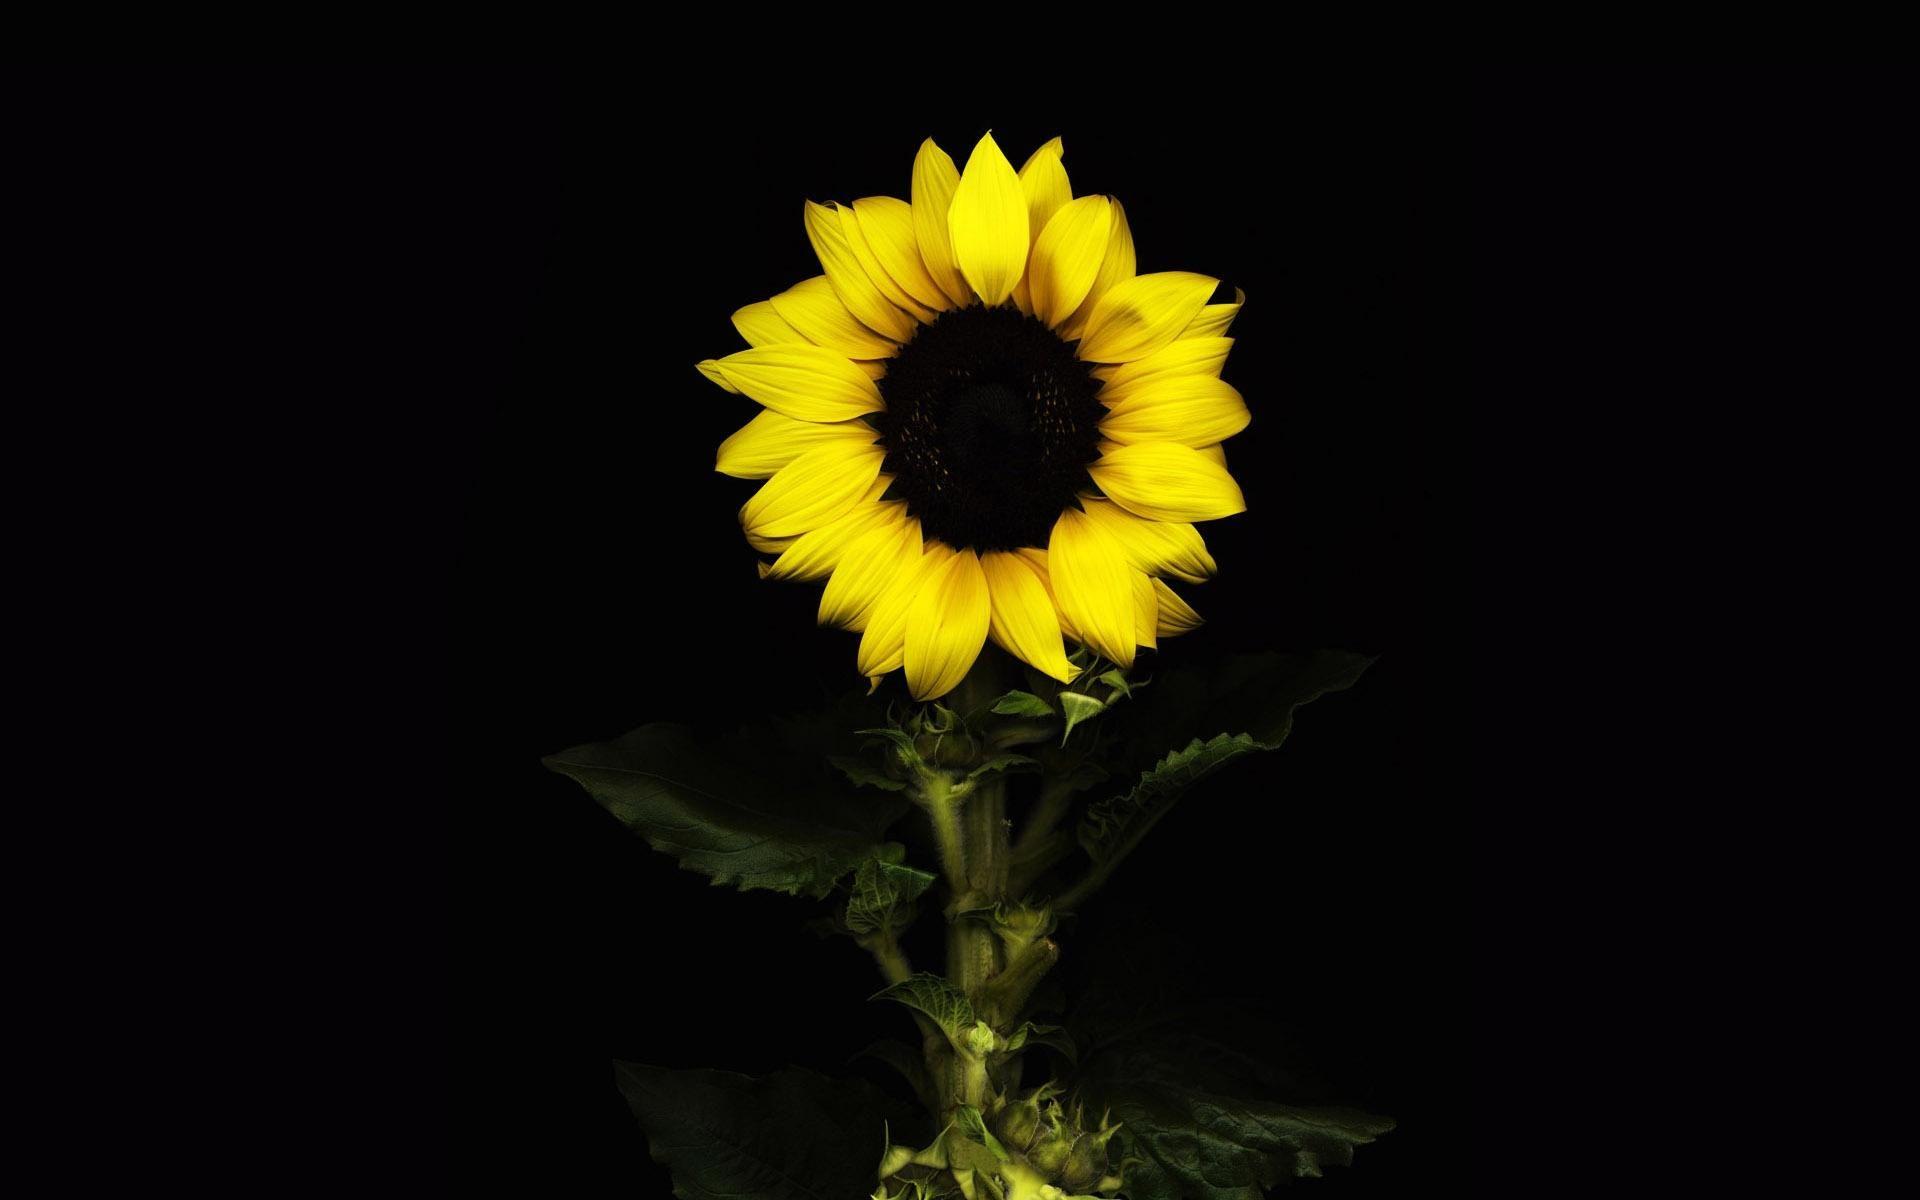 Black Sunflower Wallpapers - Top Free Black Sunflower Backgrounds